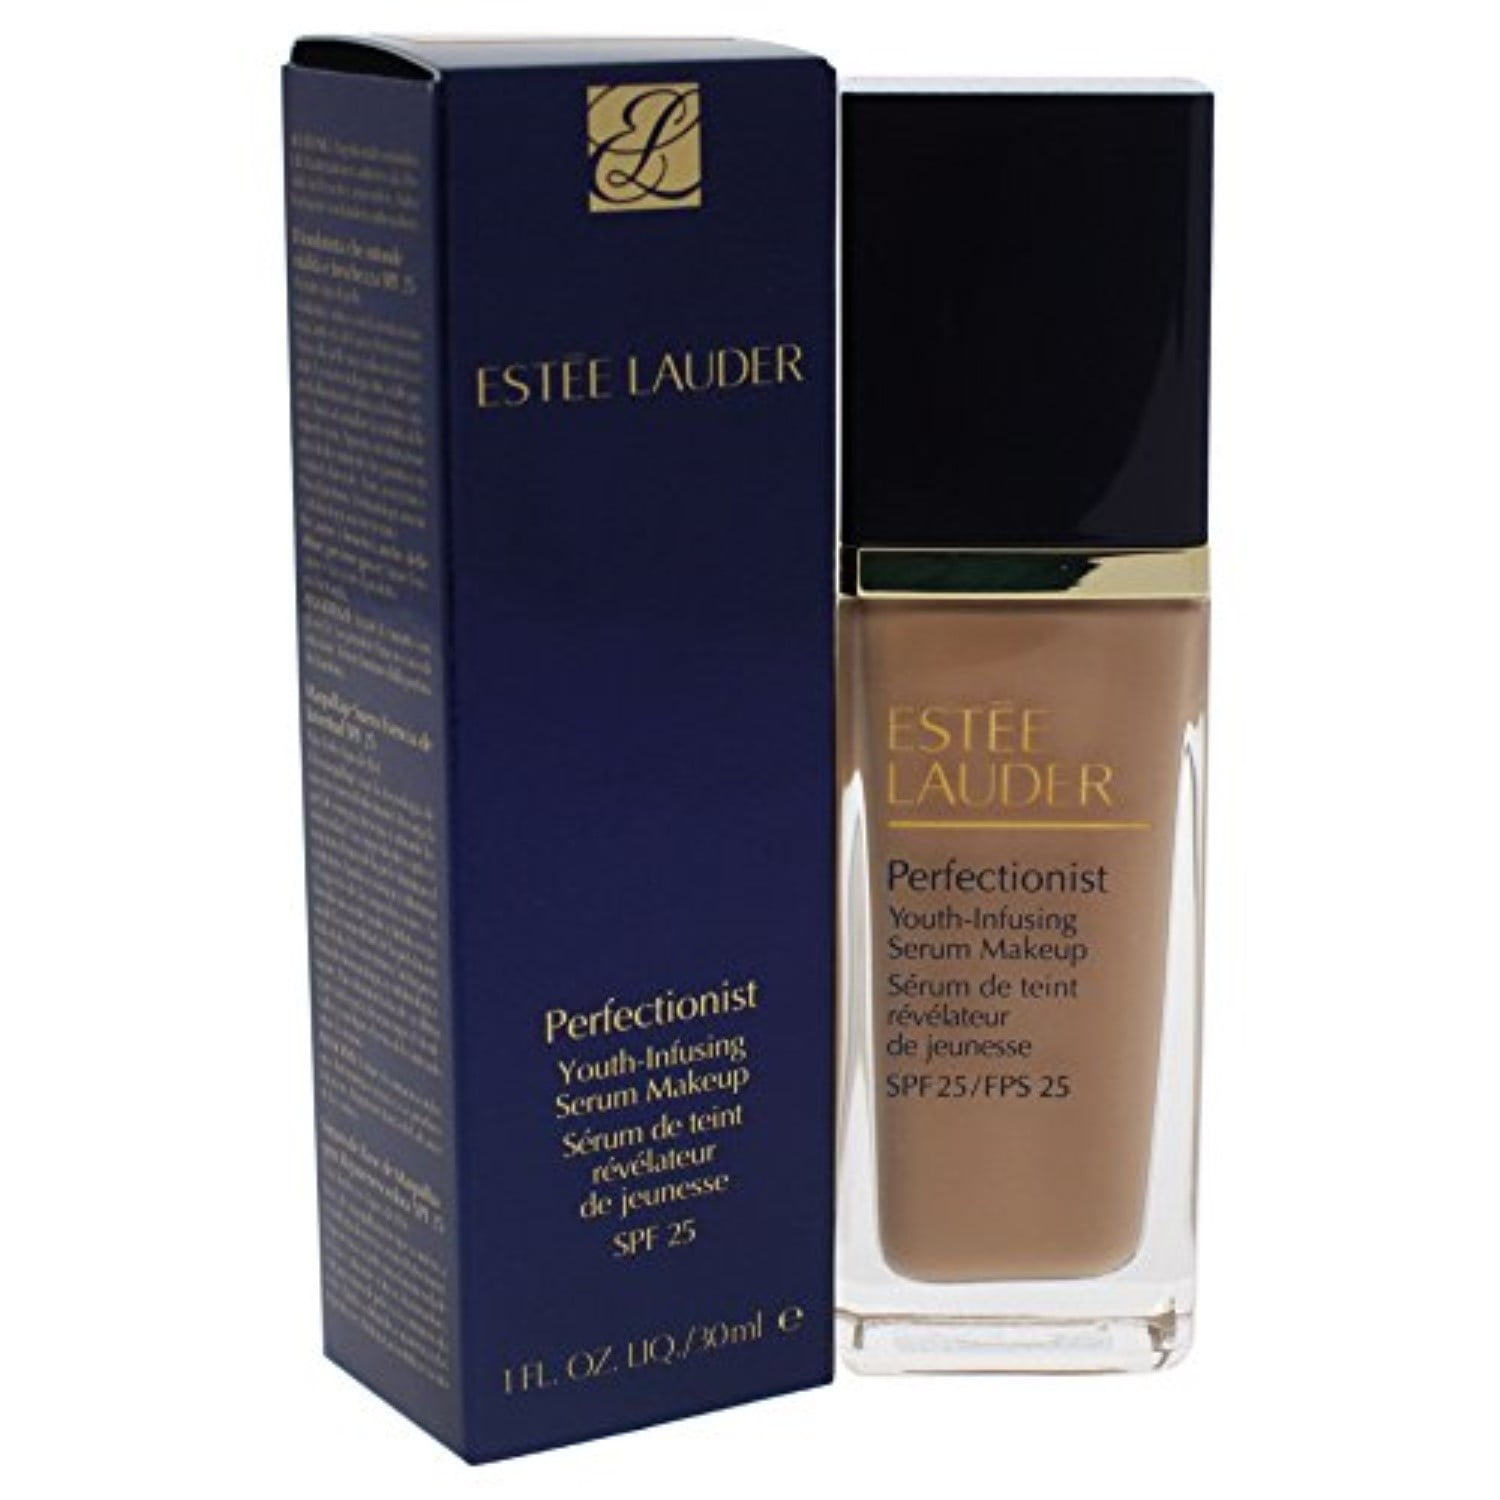 Estee Lauder Perfectionist Youth Infusing Makeup SPF25 | eBay